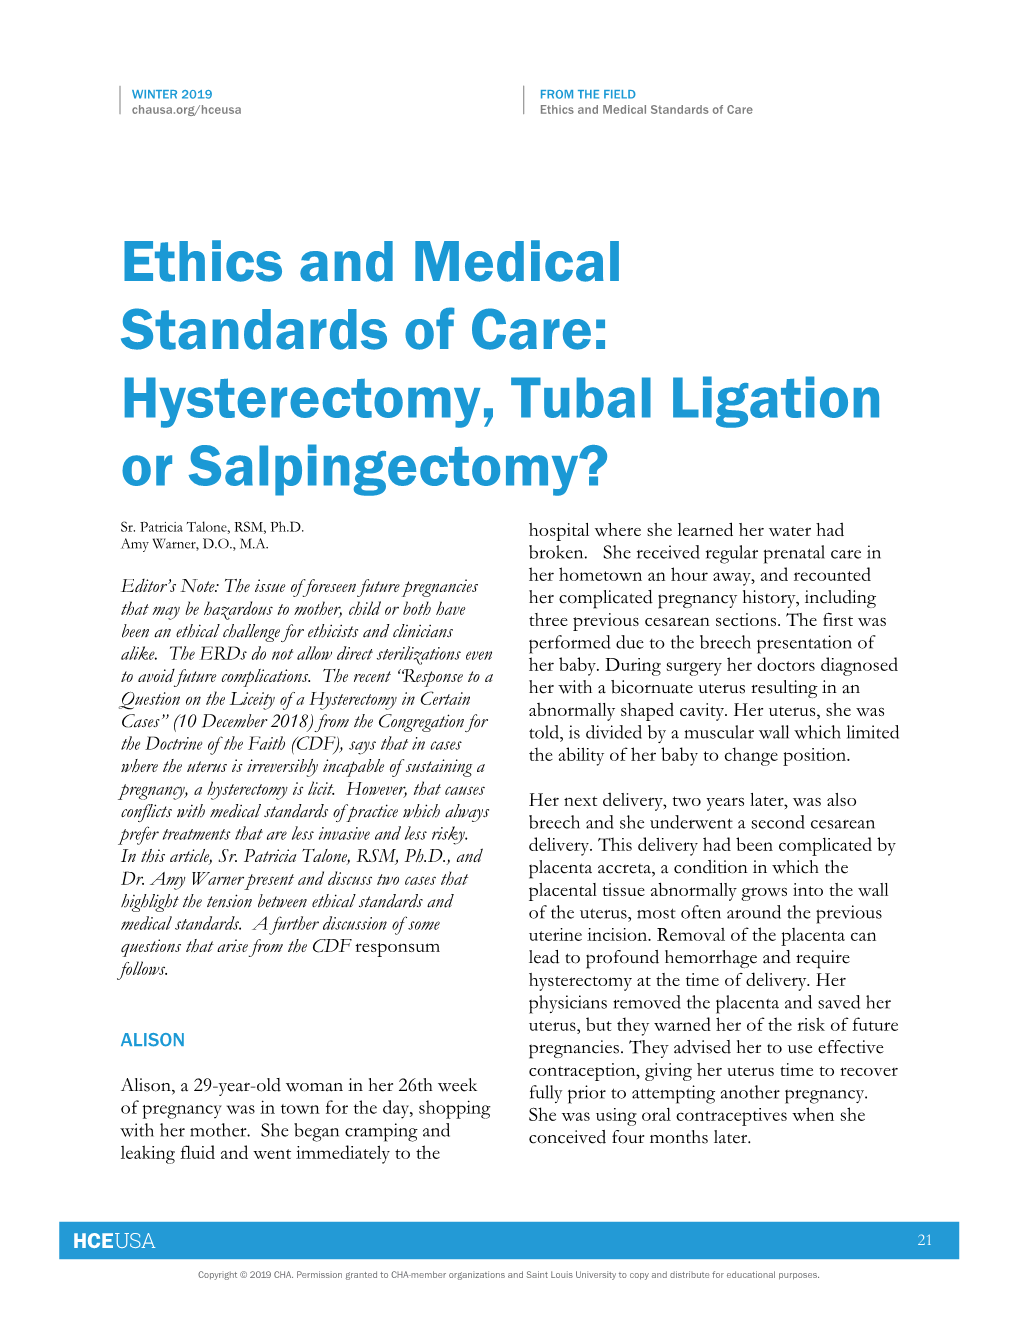 Ethics and Medical Standards of Care-Hysterectomy, Tubal Ligation